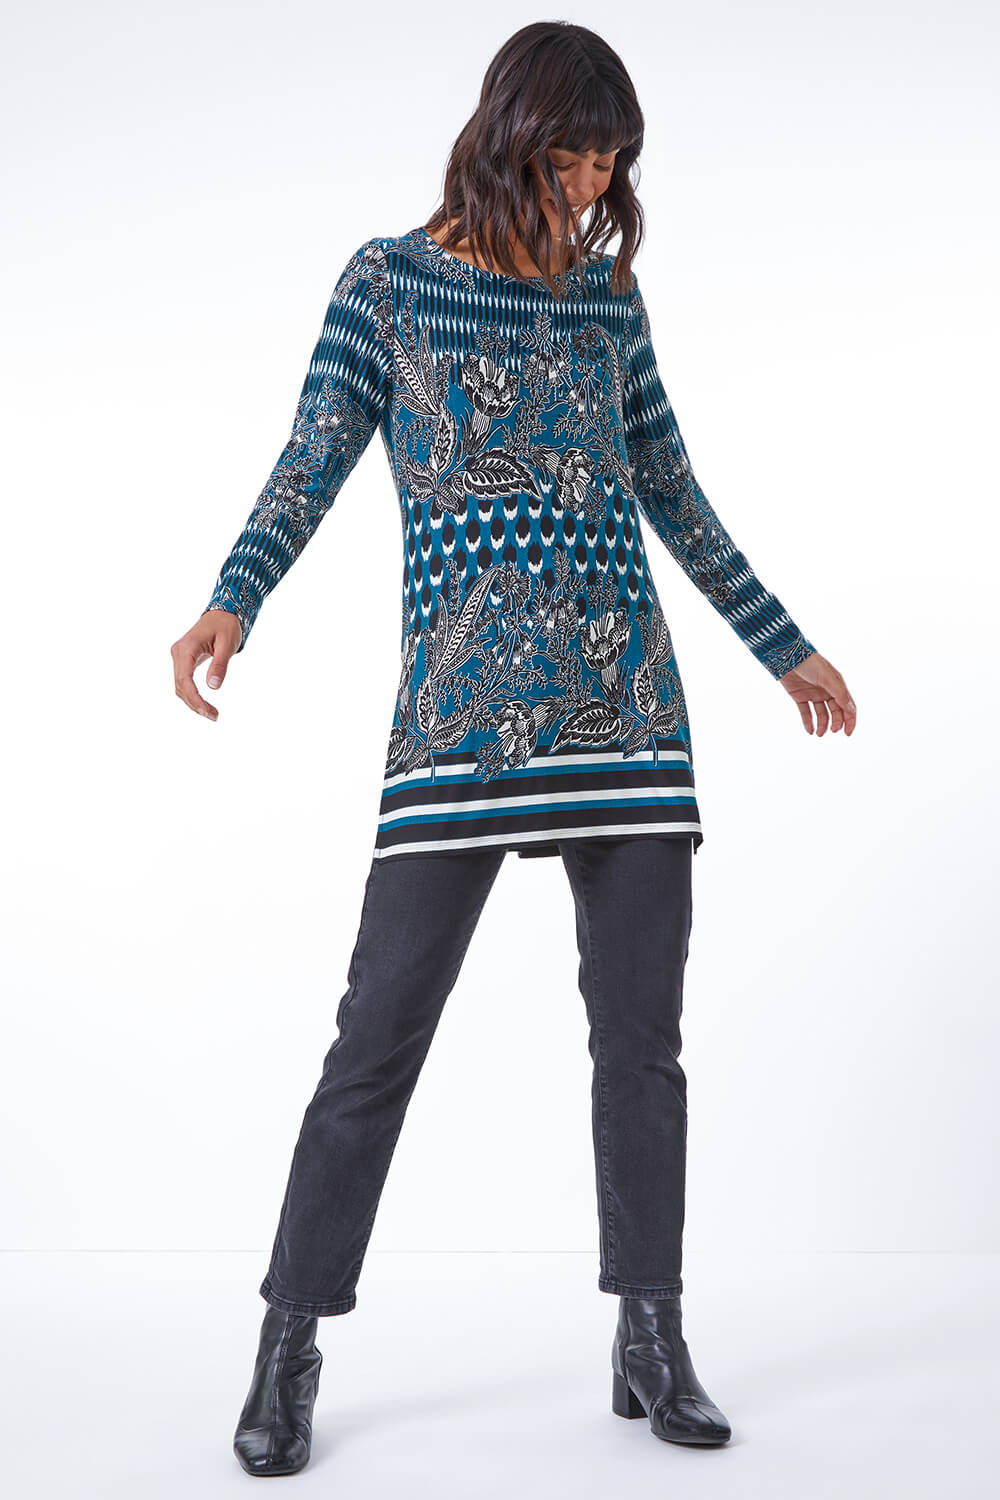 Teal Floral Border Print Longline Stretch Tunic, Image 2 of 5